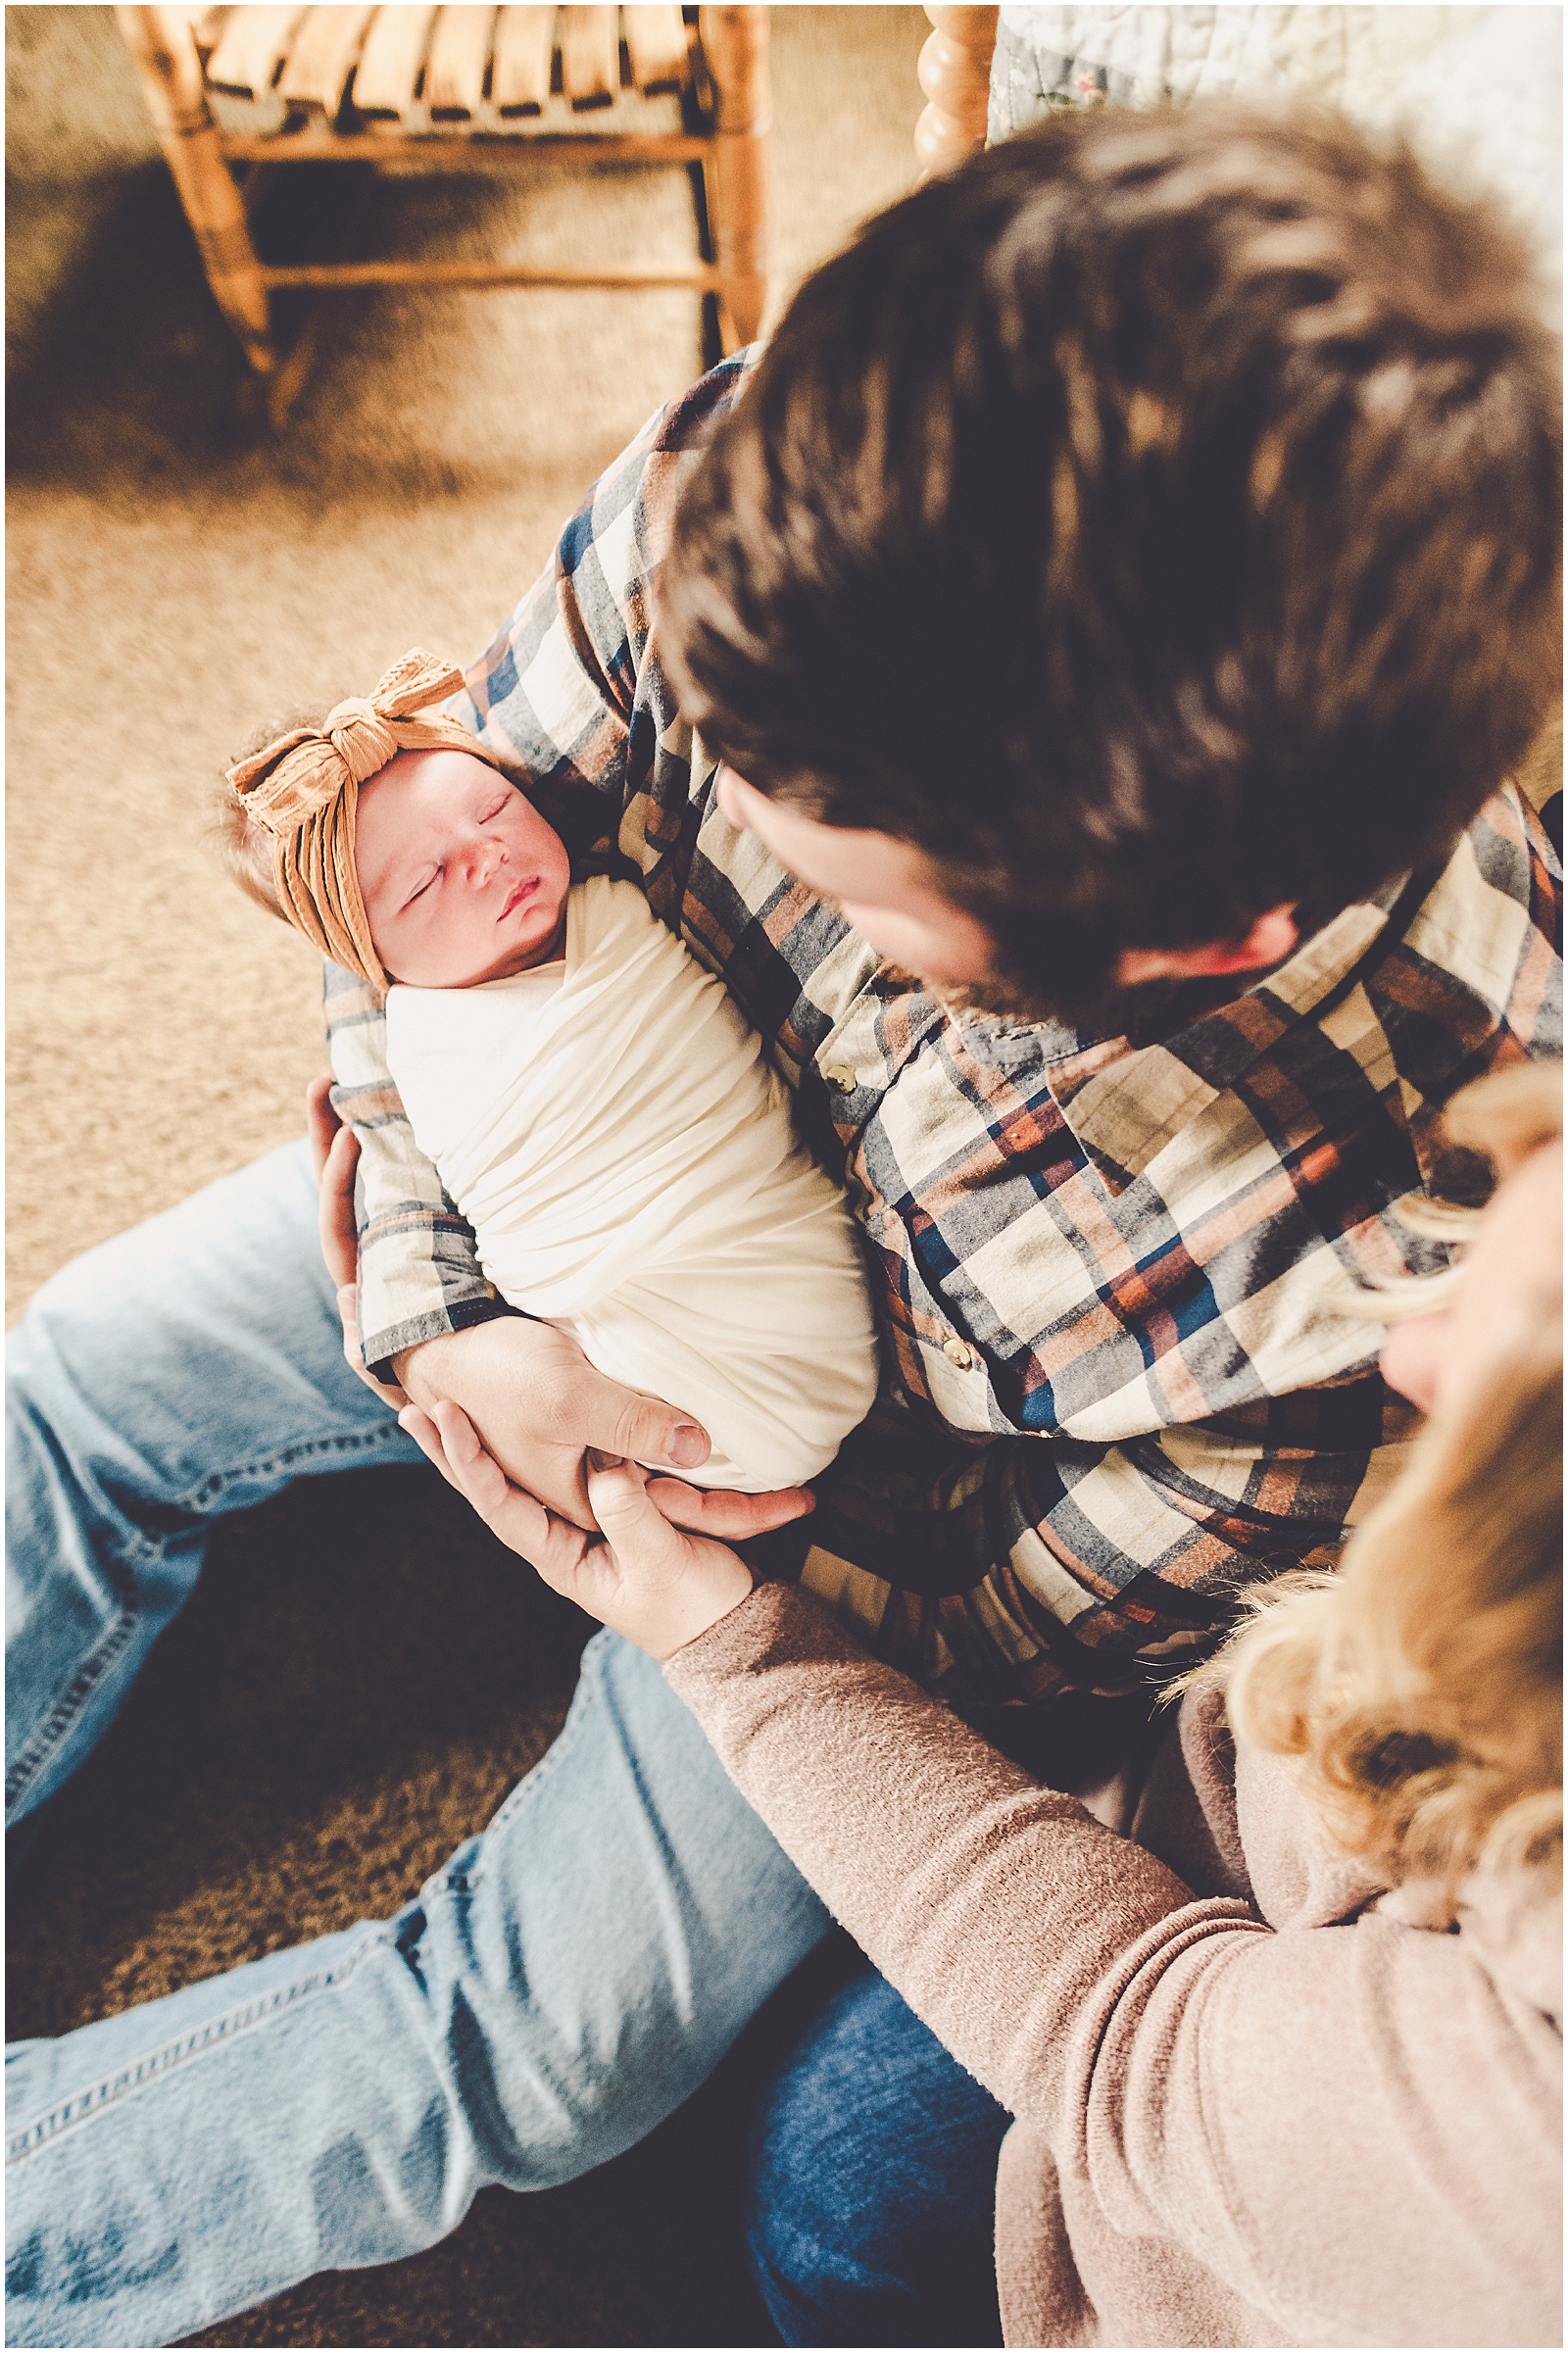 In-home Iroquois County newborn photographer for the Cowsert family with Kankakee family photographer Kara Evans Photographer.